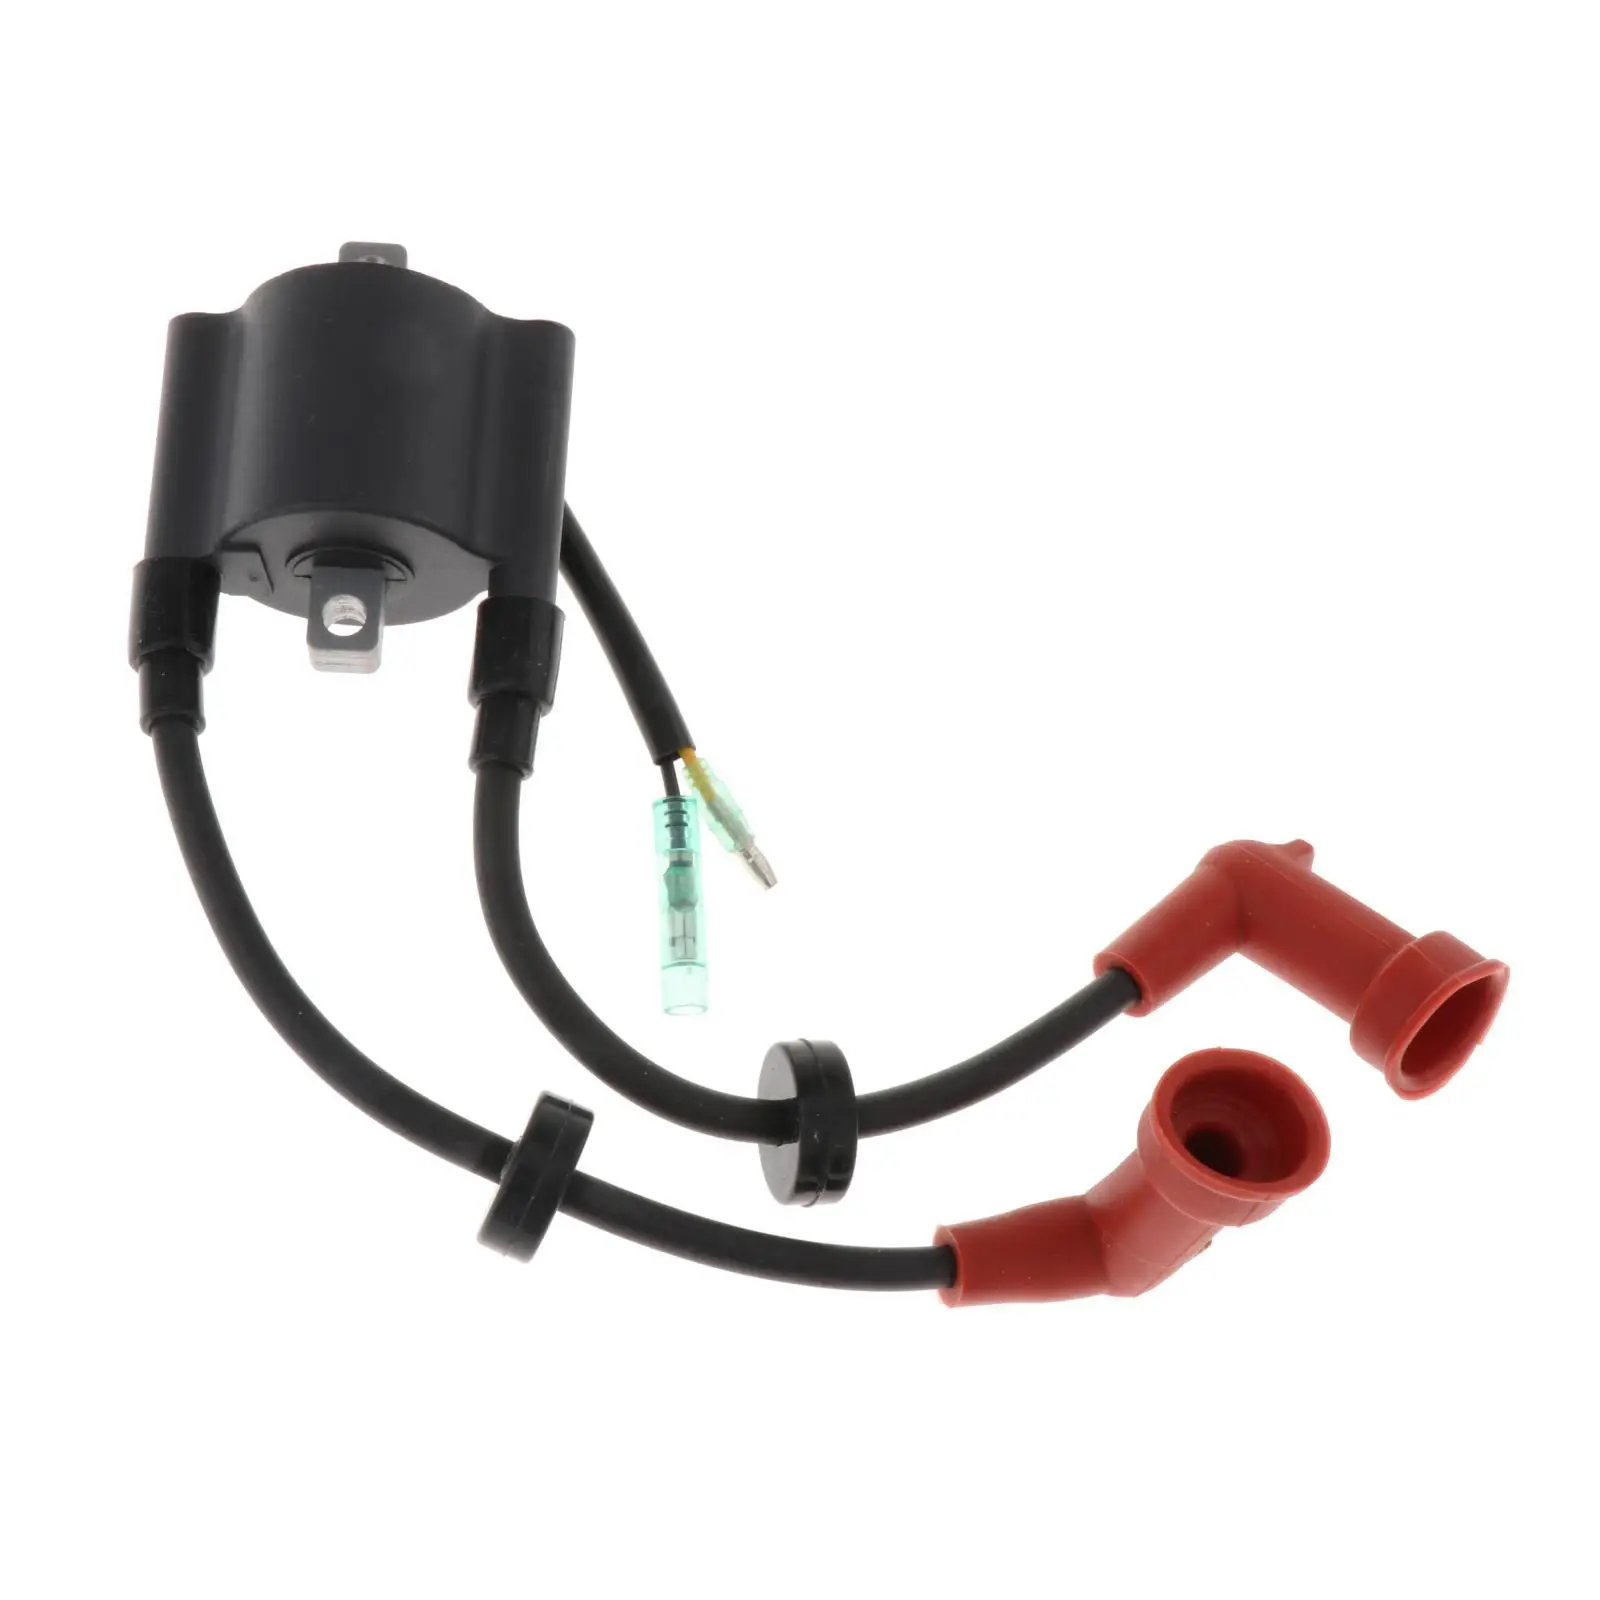 Boat Motor Ignition Coil Assembly 6B4-85570-00 for Outboard Outboard Motors